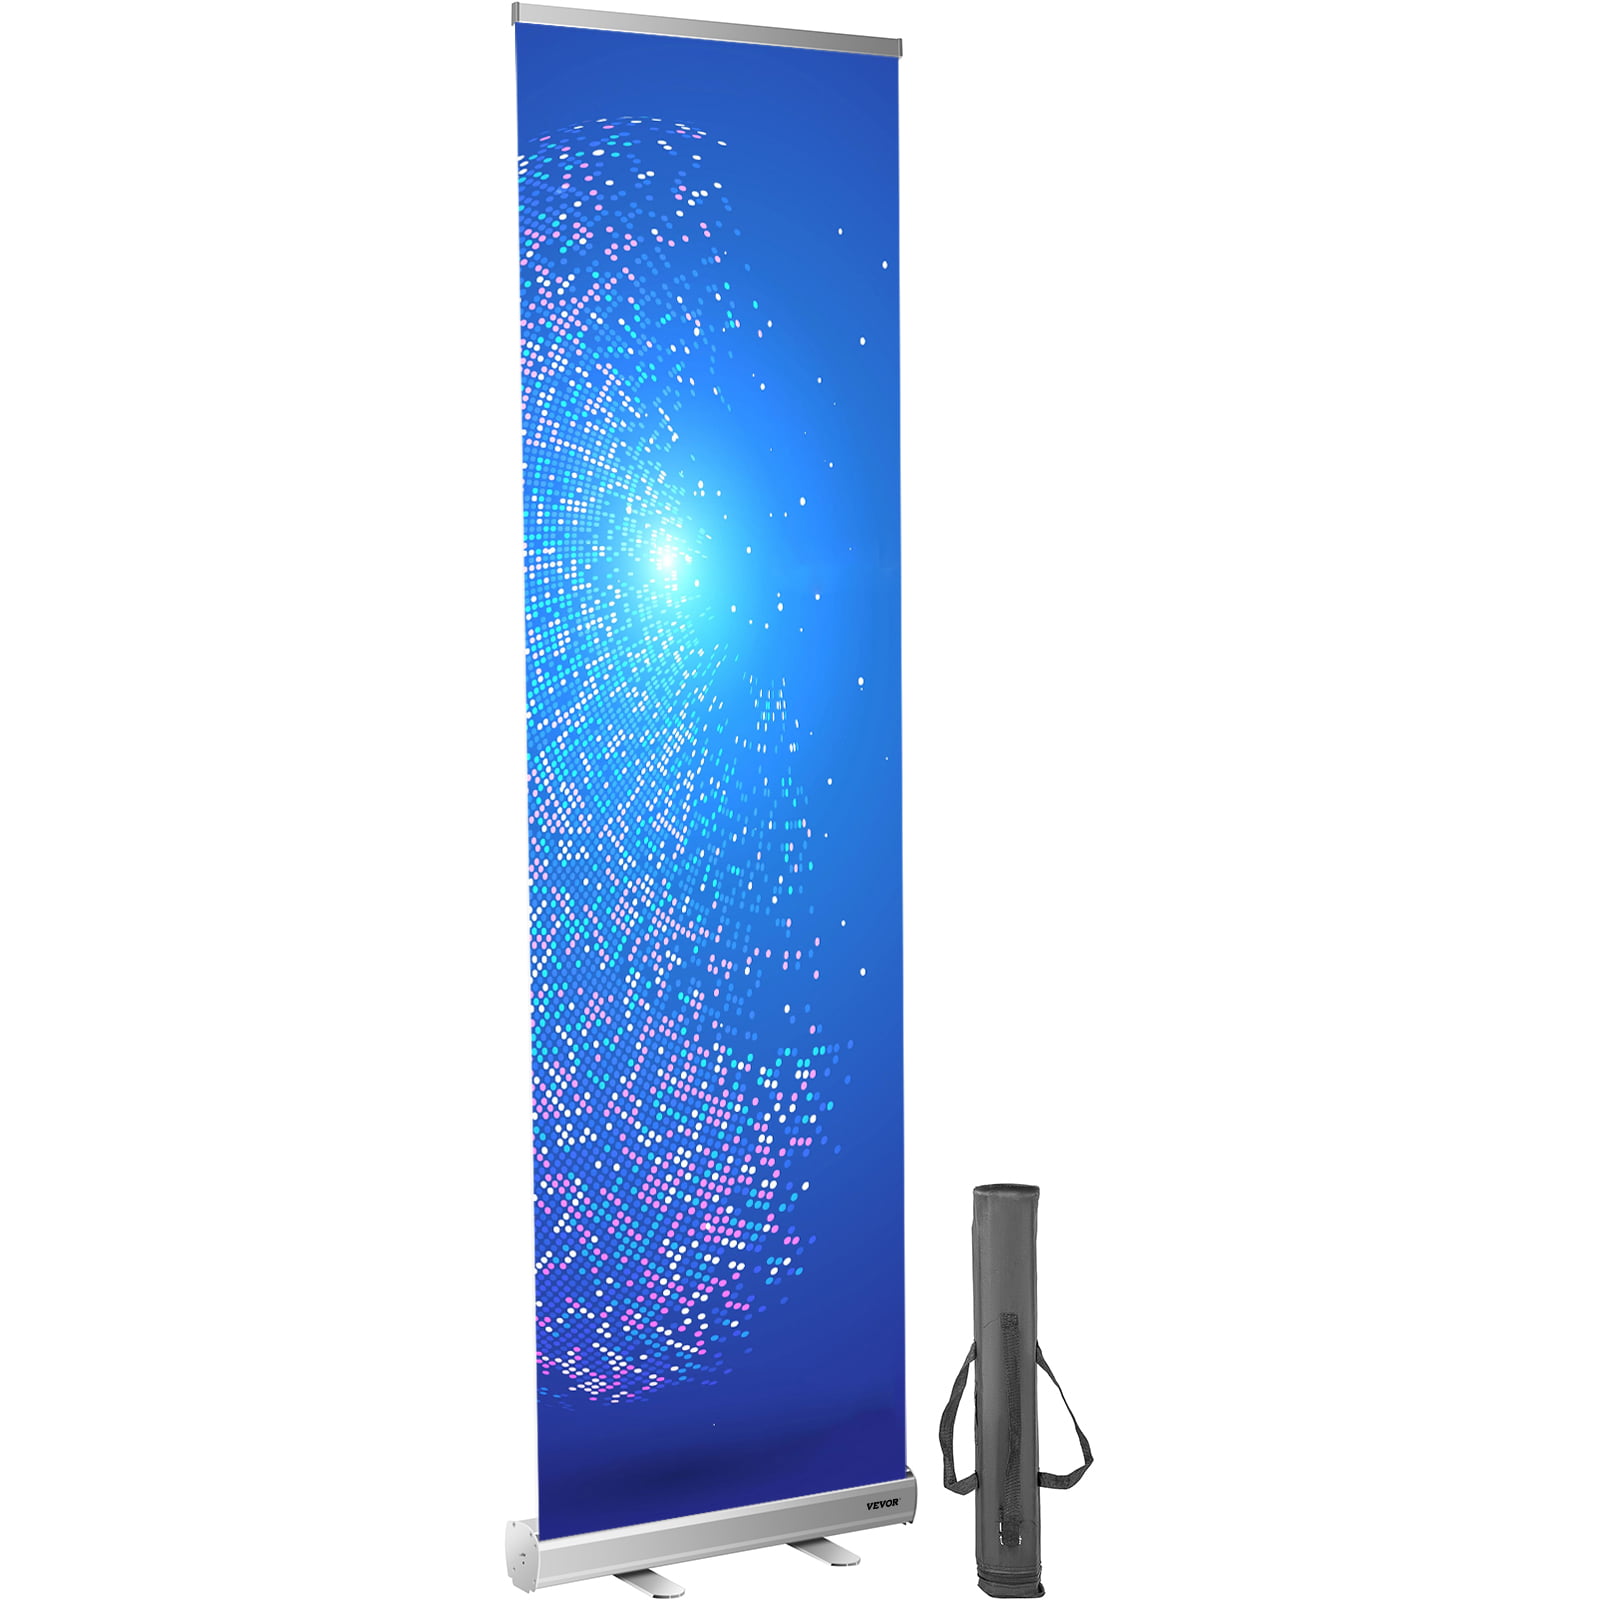 42.2X78.7inches XIAOYUE Floor Standing Sneezing Guard,with Retractable Tarp,Roll Up Banner Screen,Portable Social Isolation Screen for Hospitals Offices Banks Gyms,with Carrying Bag